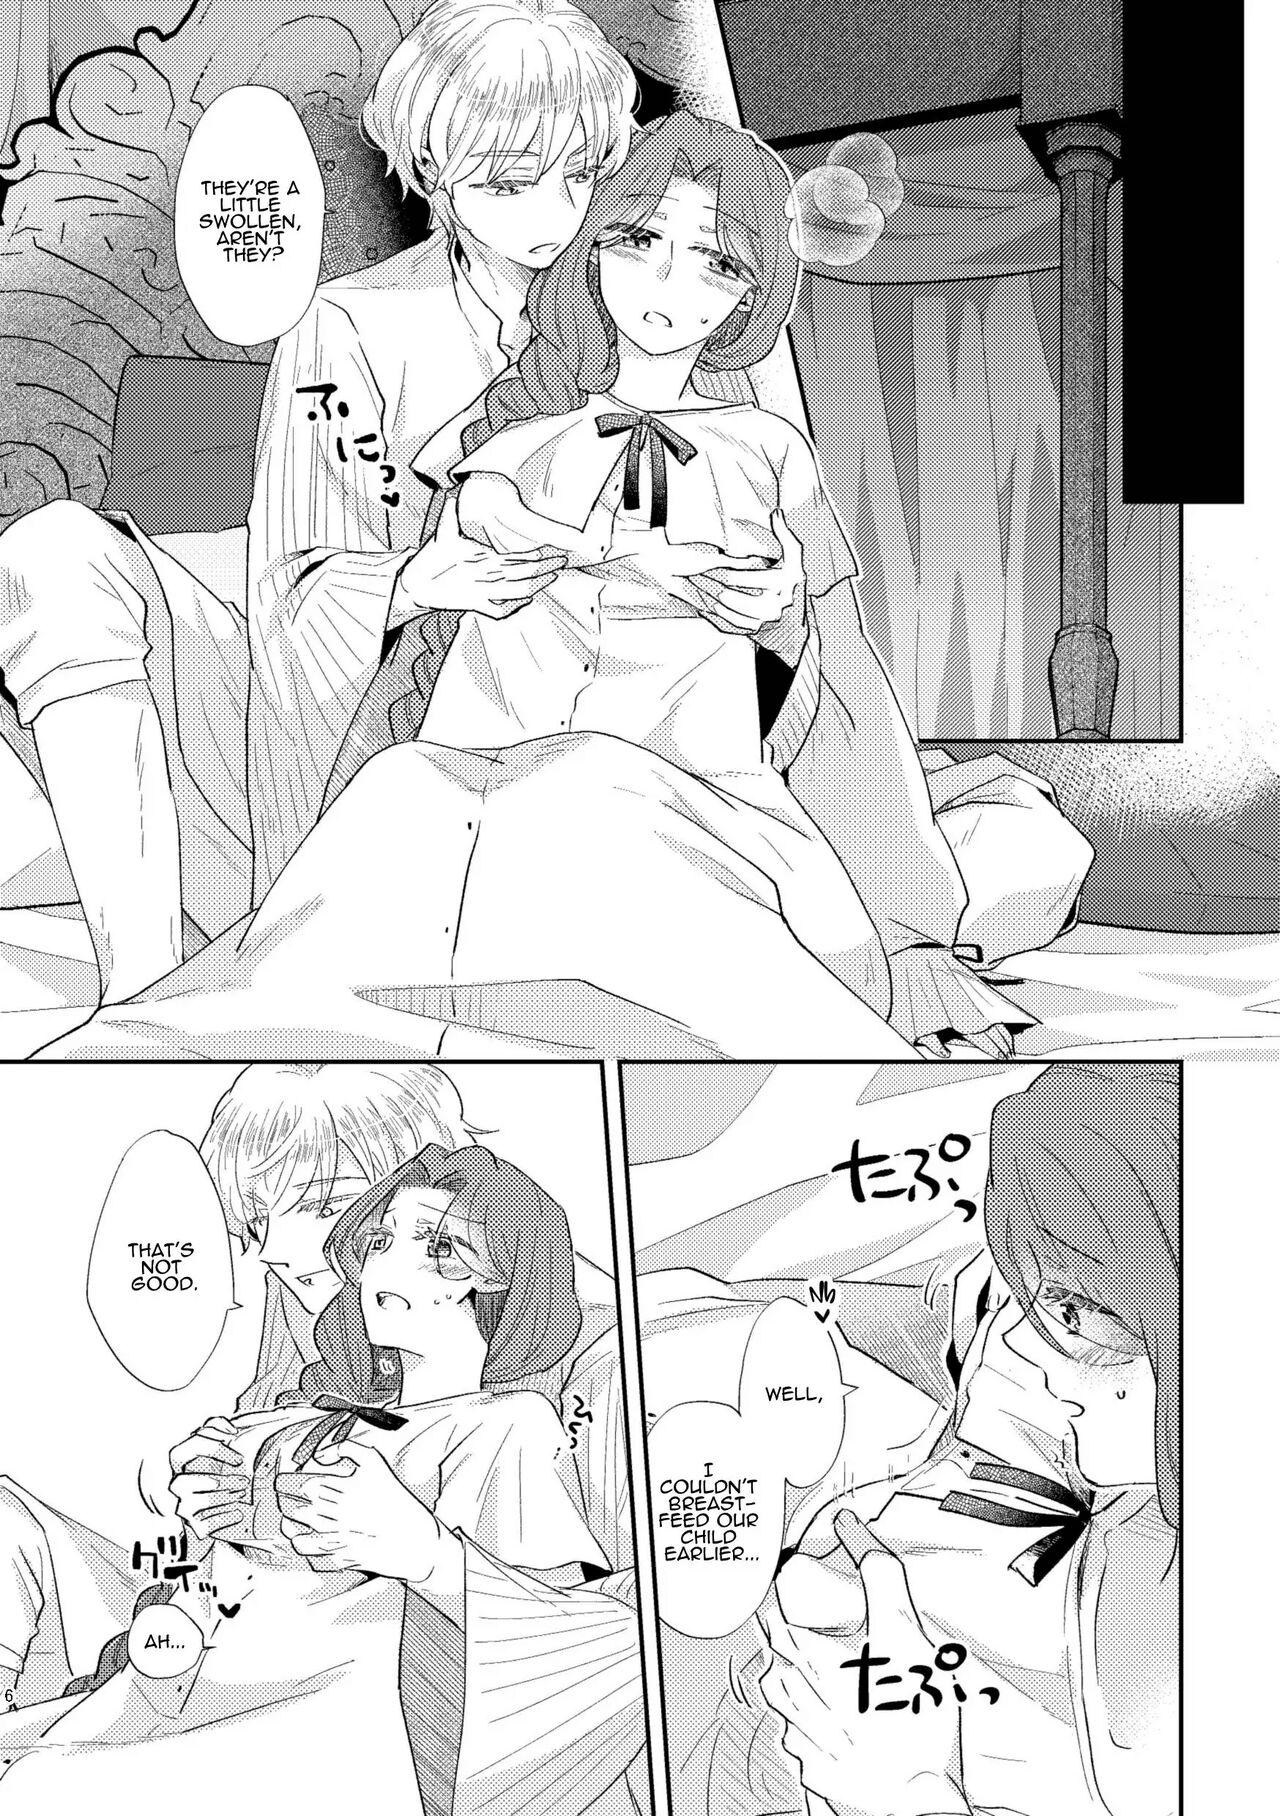 Leche Shounen Ou to Toshiue Ouhi EverAfter | The Boy King and His Older Queen EverAfter Wives - Page 8